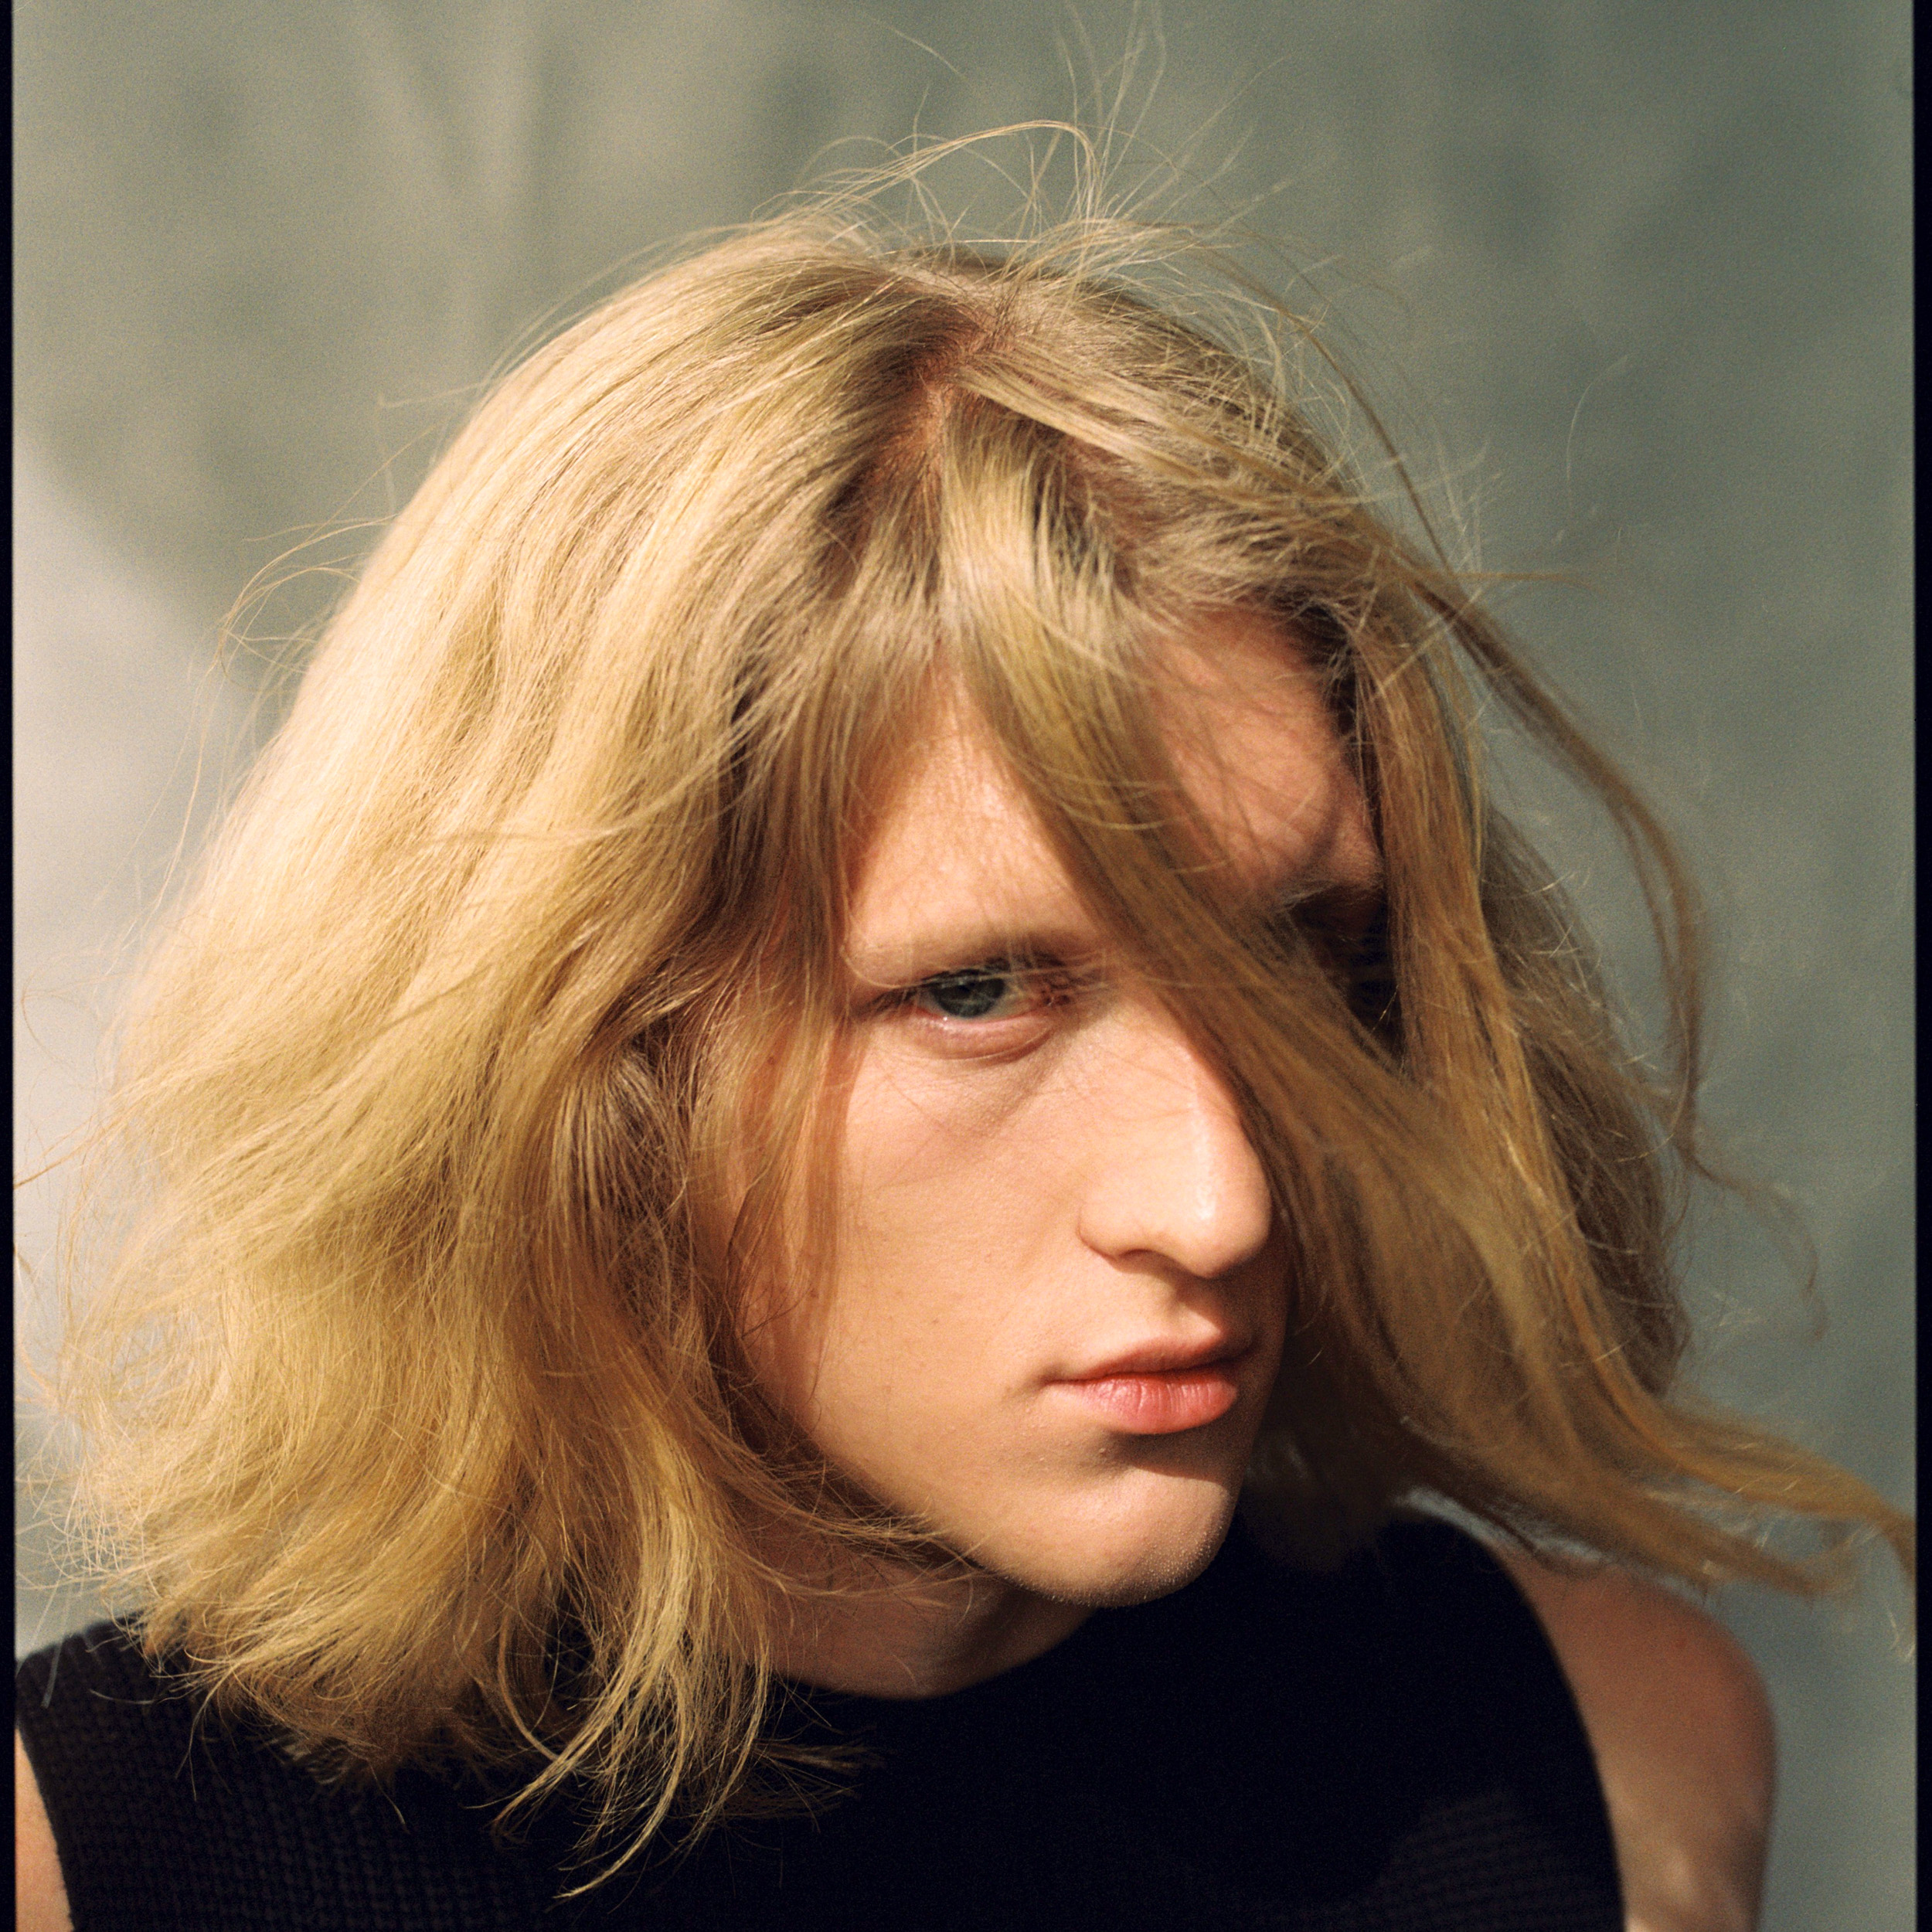 Portrait of a young blond man with the long hair